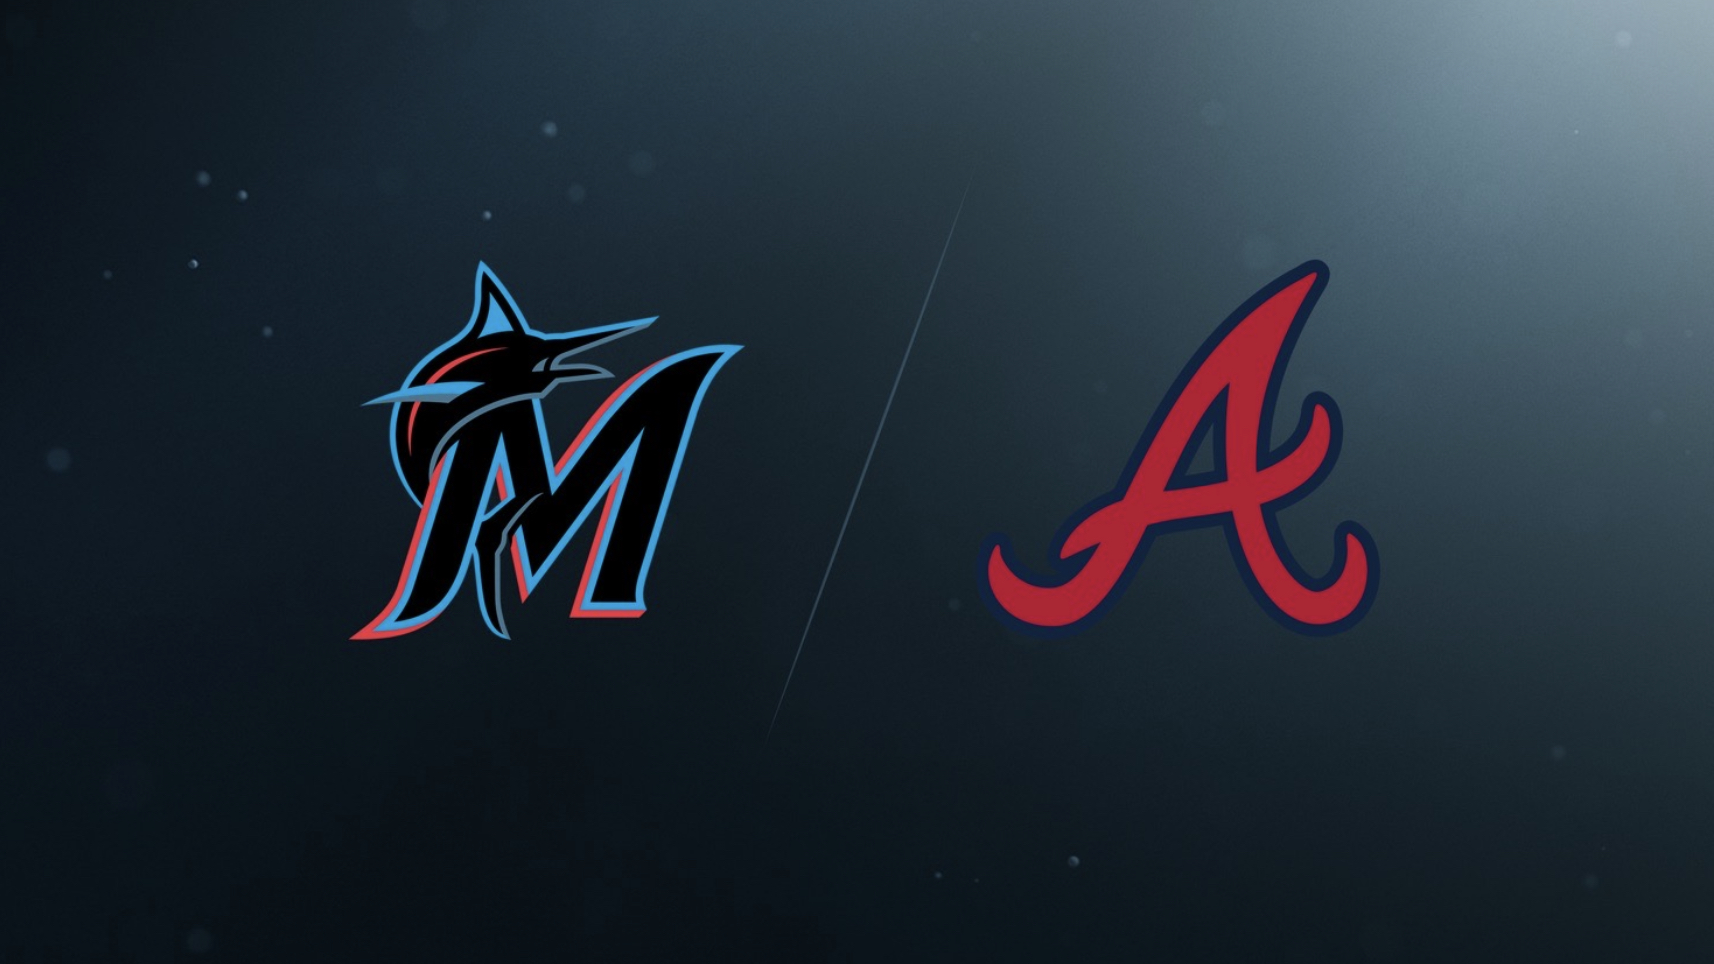 Friday Night Baseball How to watch Miami Marlins at Atlanta Braves on Apple TV Plus free iMore